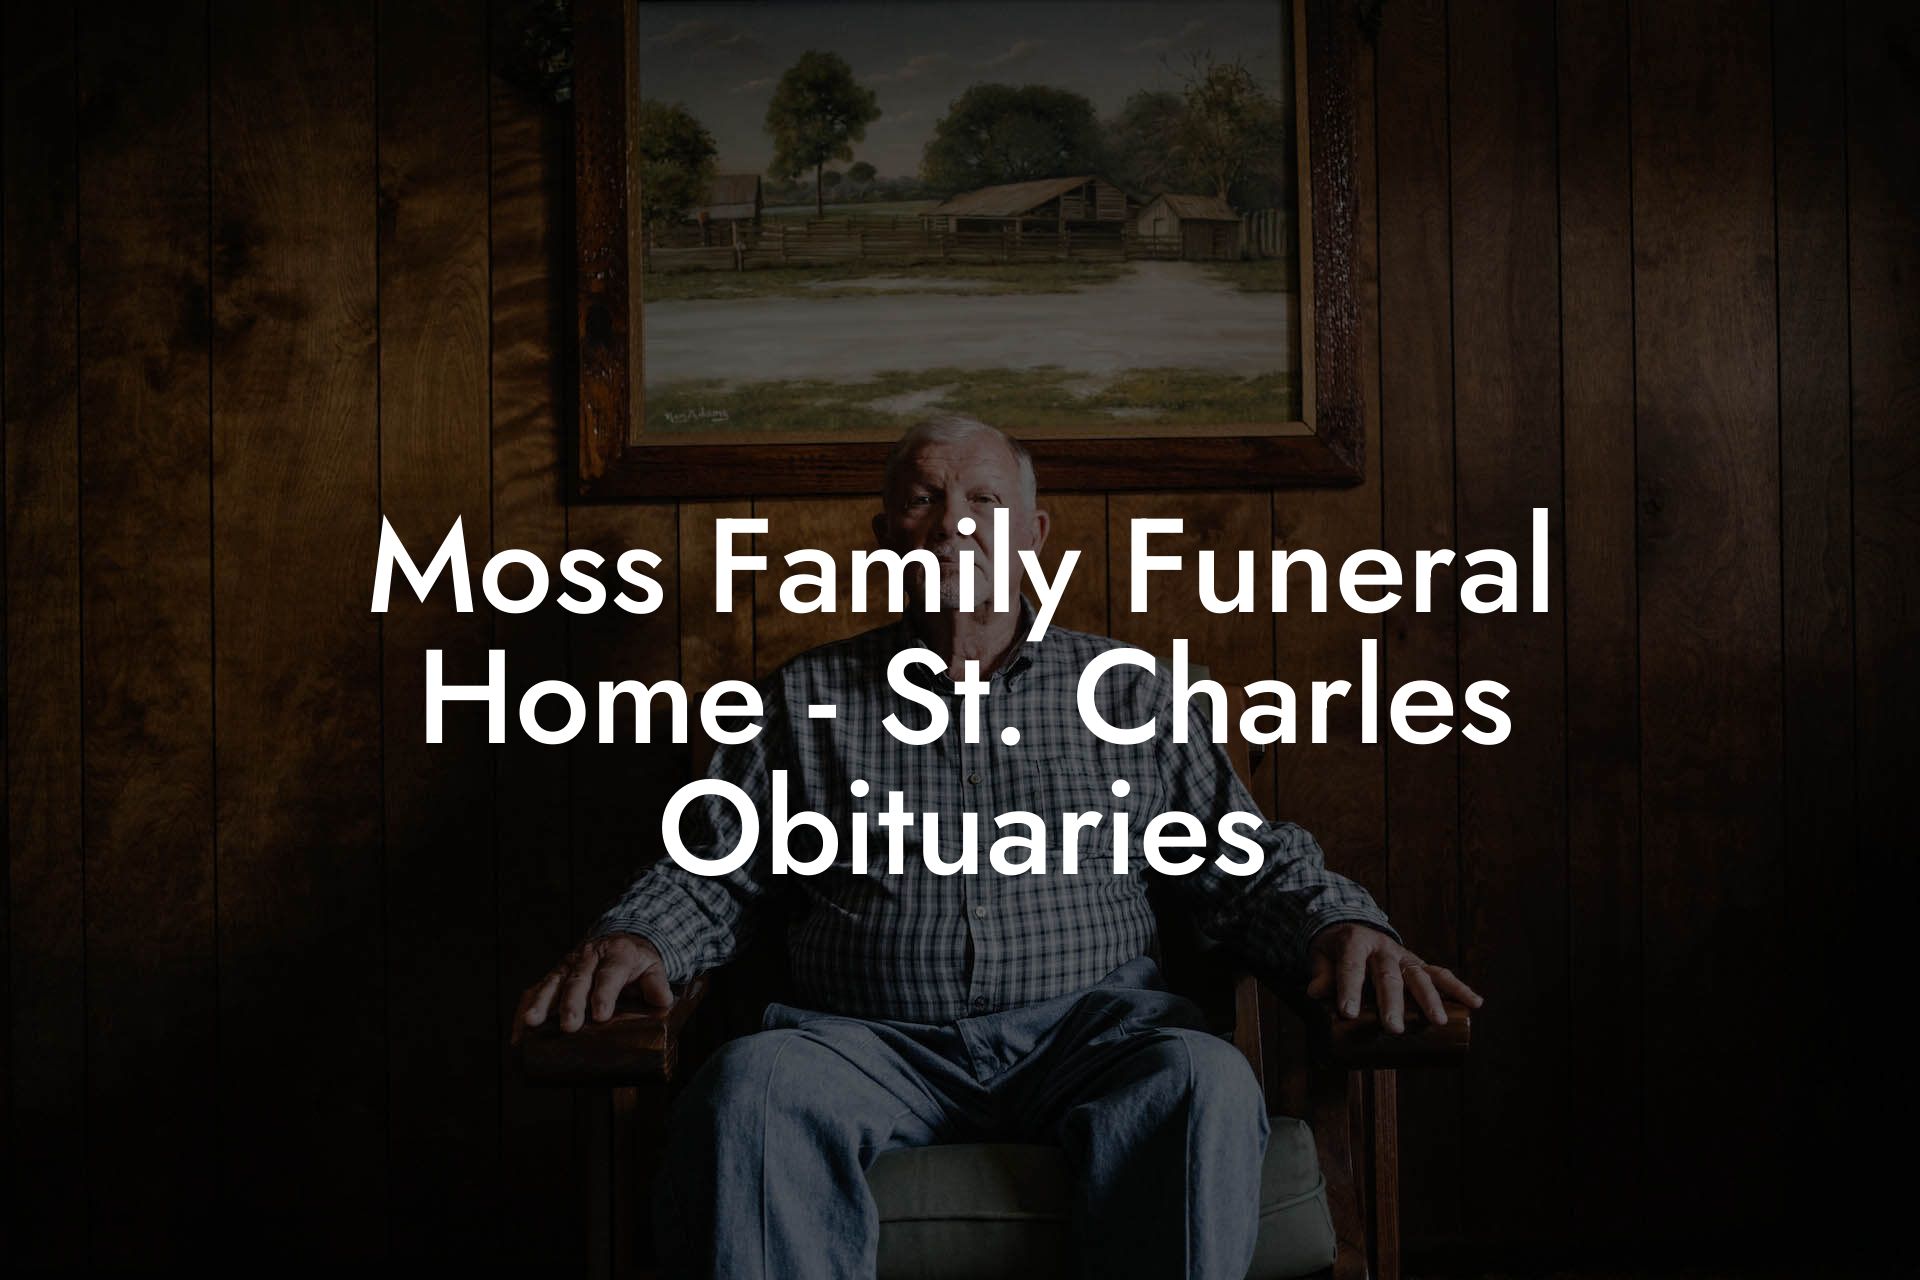 Moss Family Funeral Home - St. Charles Obituaries